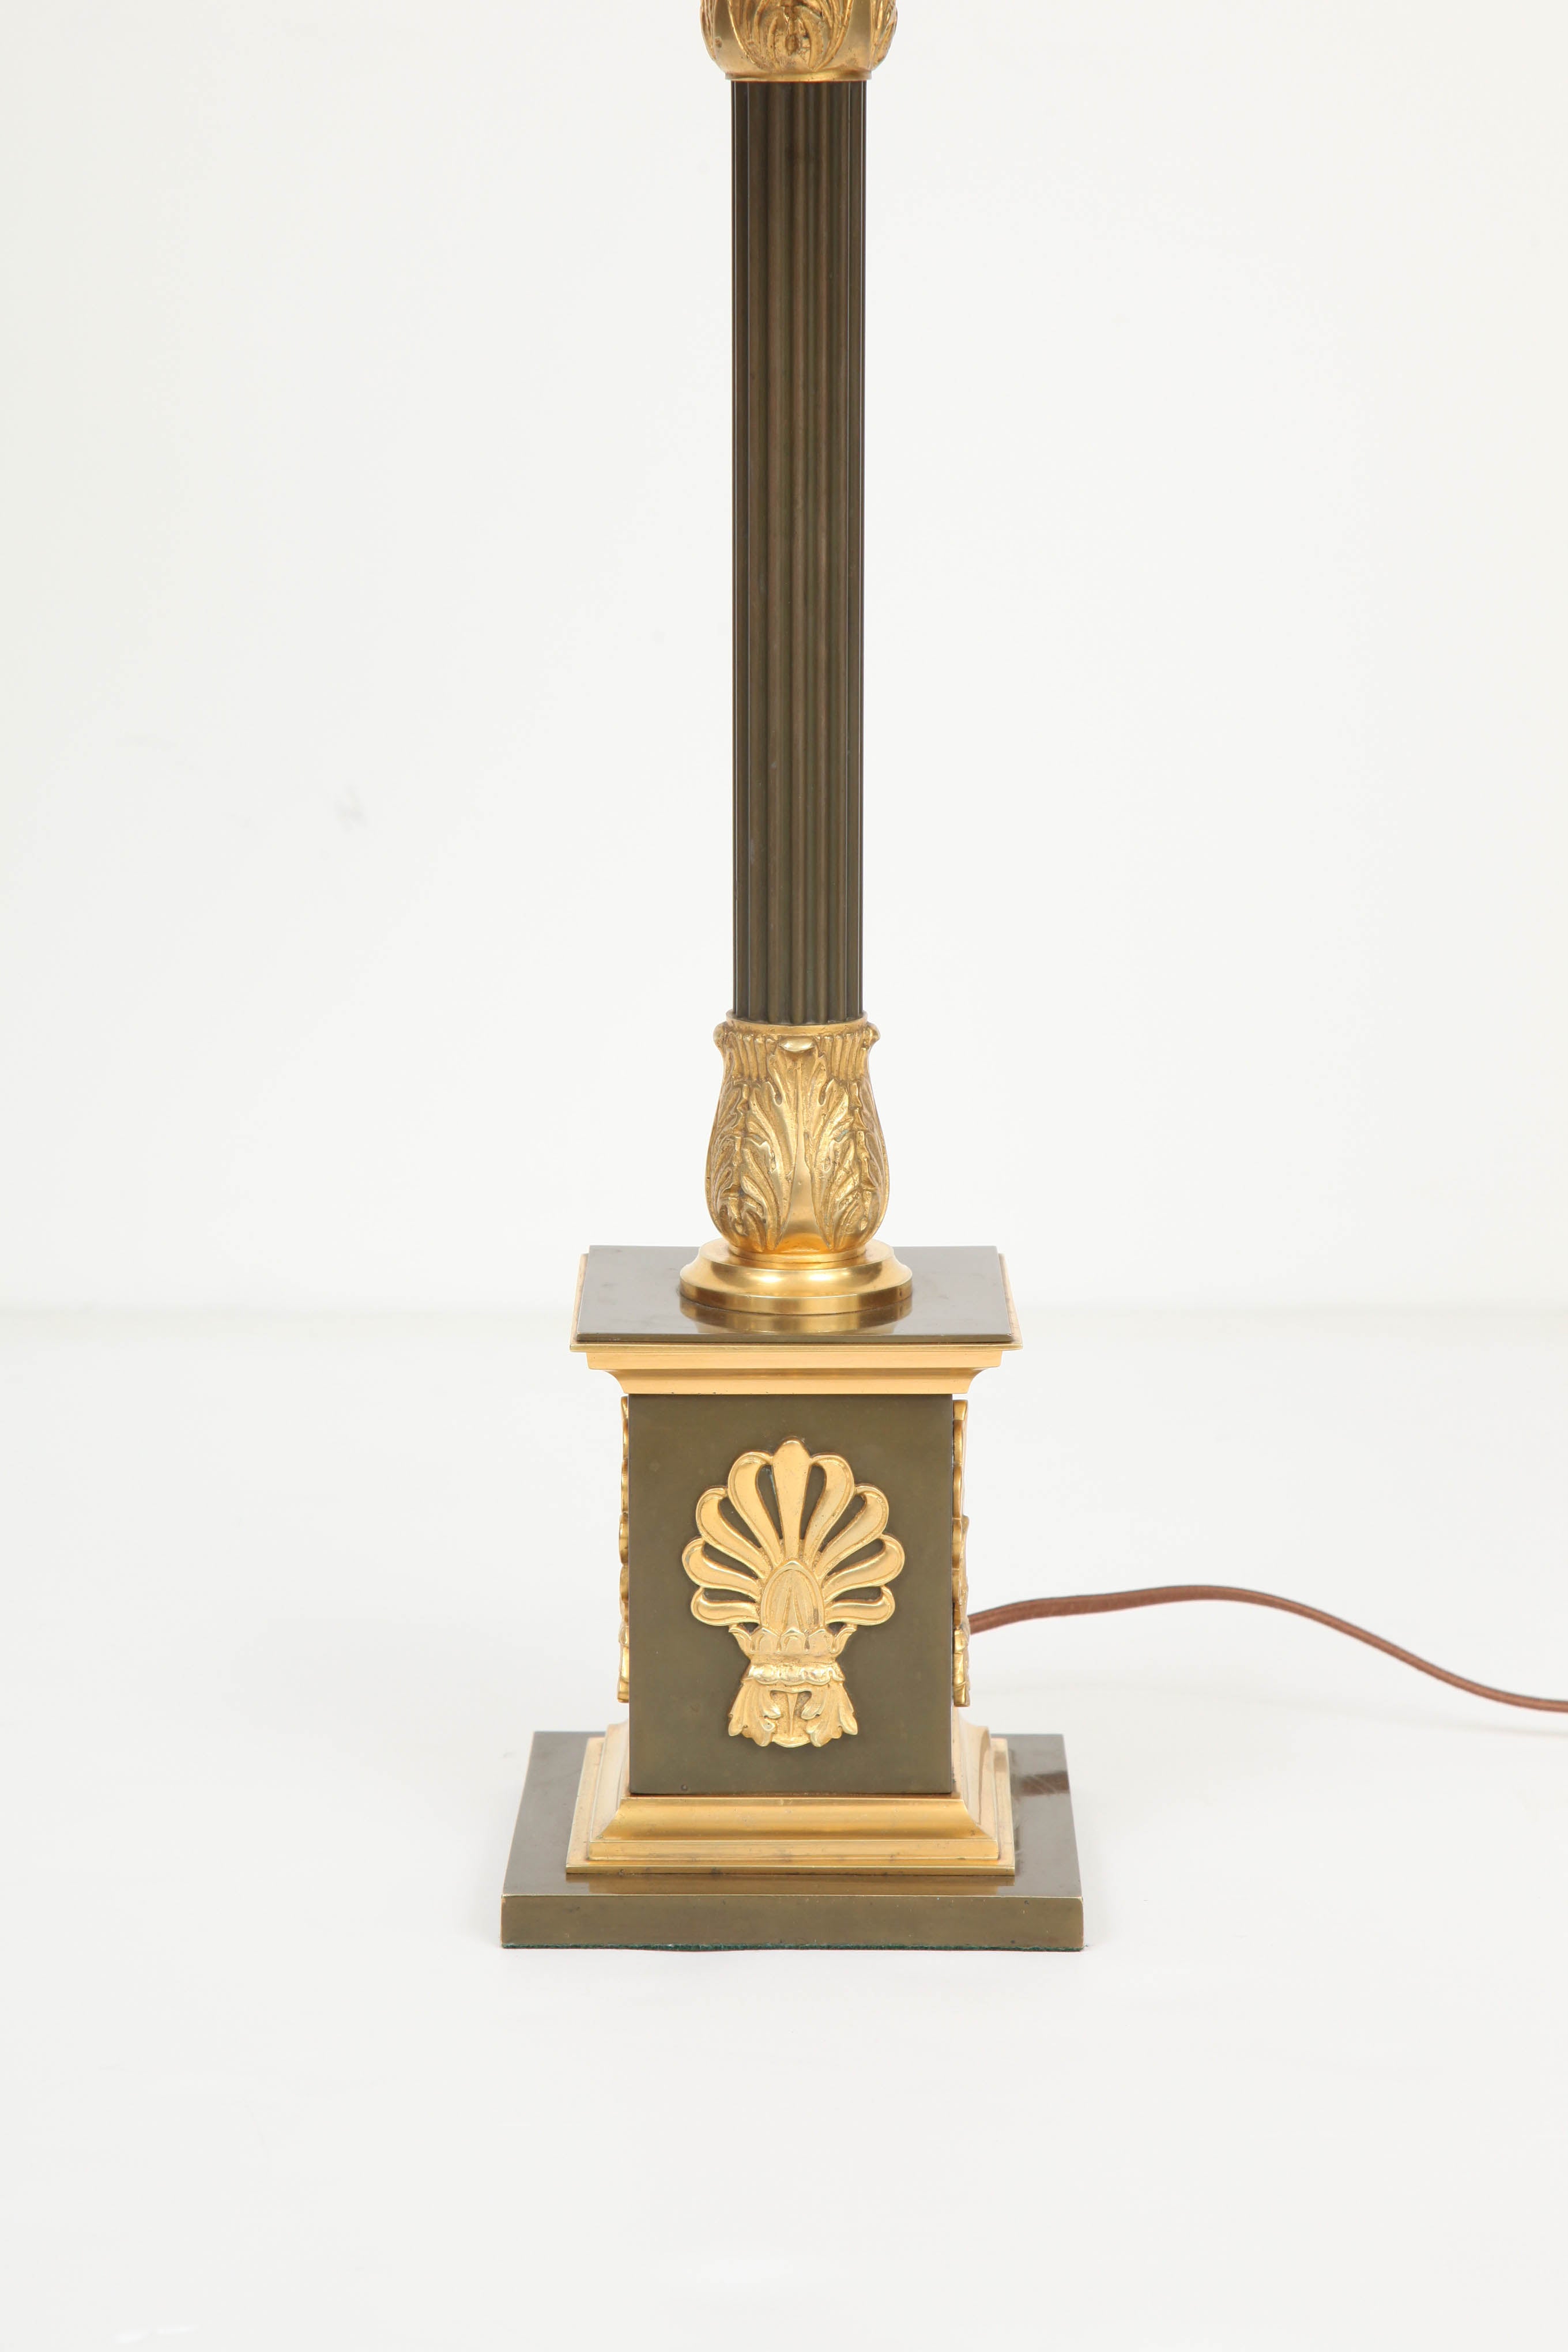 A Danish Empire gilt bronze and patinated bronze table lamp, Mid 19th Century, converted from oil to US electric, of classical firm with a fluted stem, acanthus leaf top and bottom, raised on a square pedestal with palmette leaves.